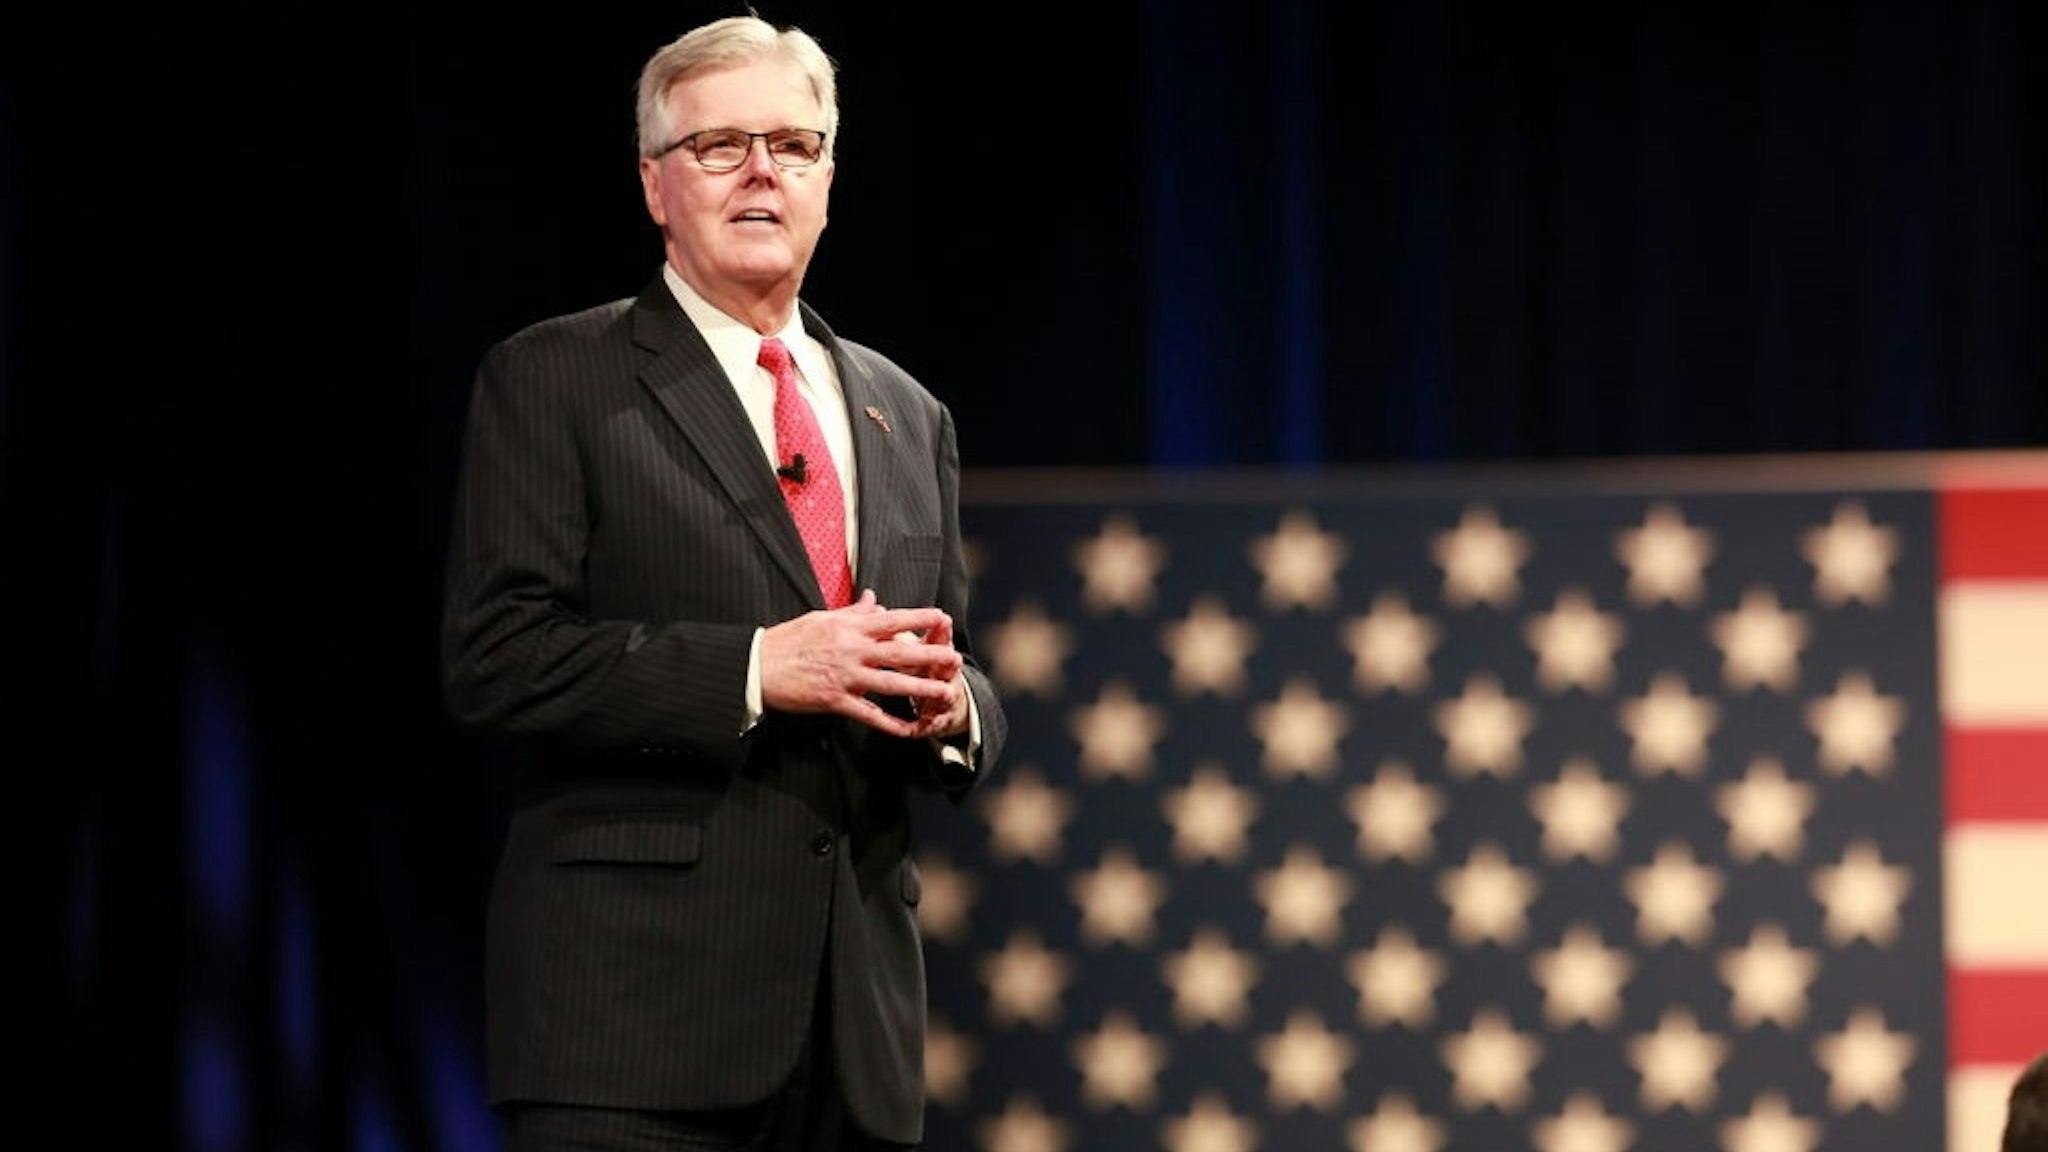 Dan Patrick, Texas' Lieutenant Governor, speaks during the Conservative Political Action Conference (CPAC) in Dallas, Texas, U.S., on Friday, July 9, 2021.